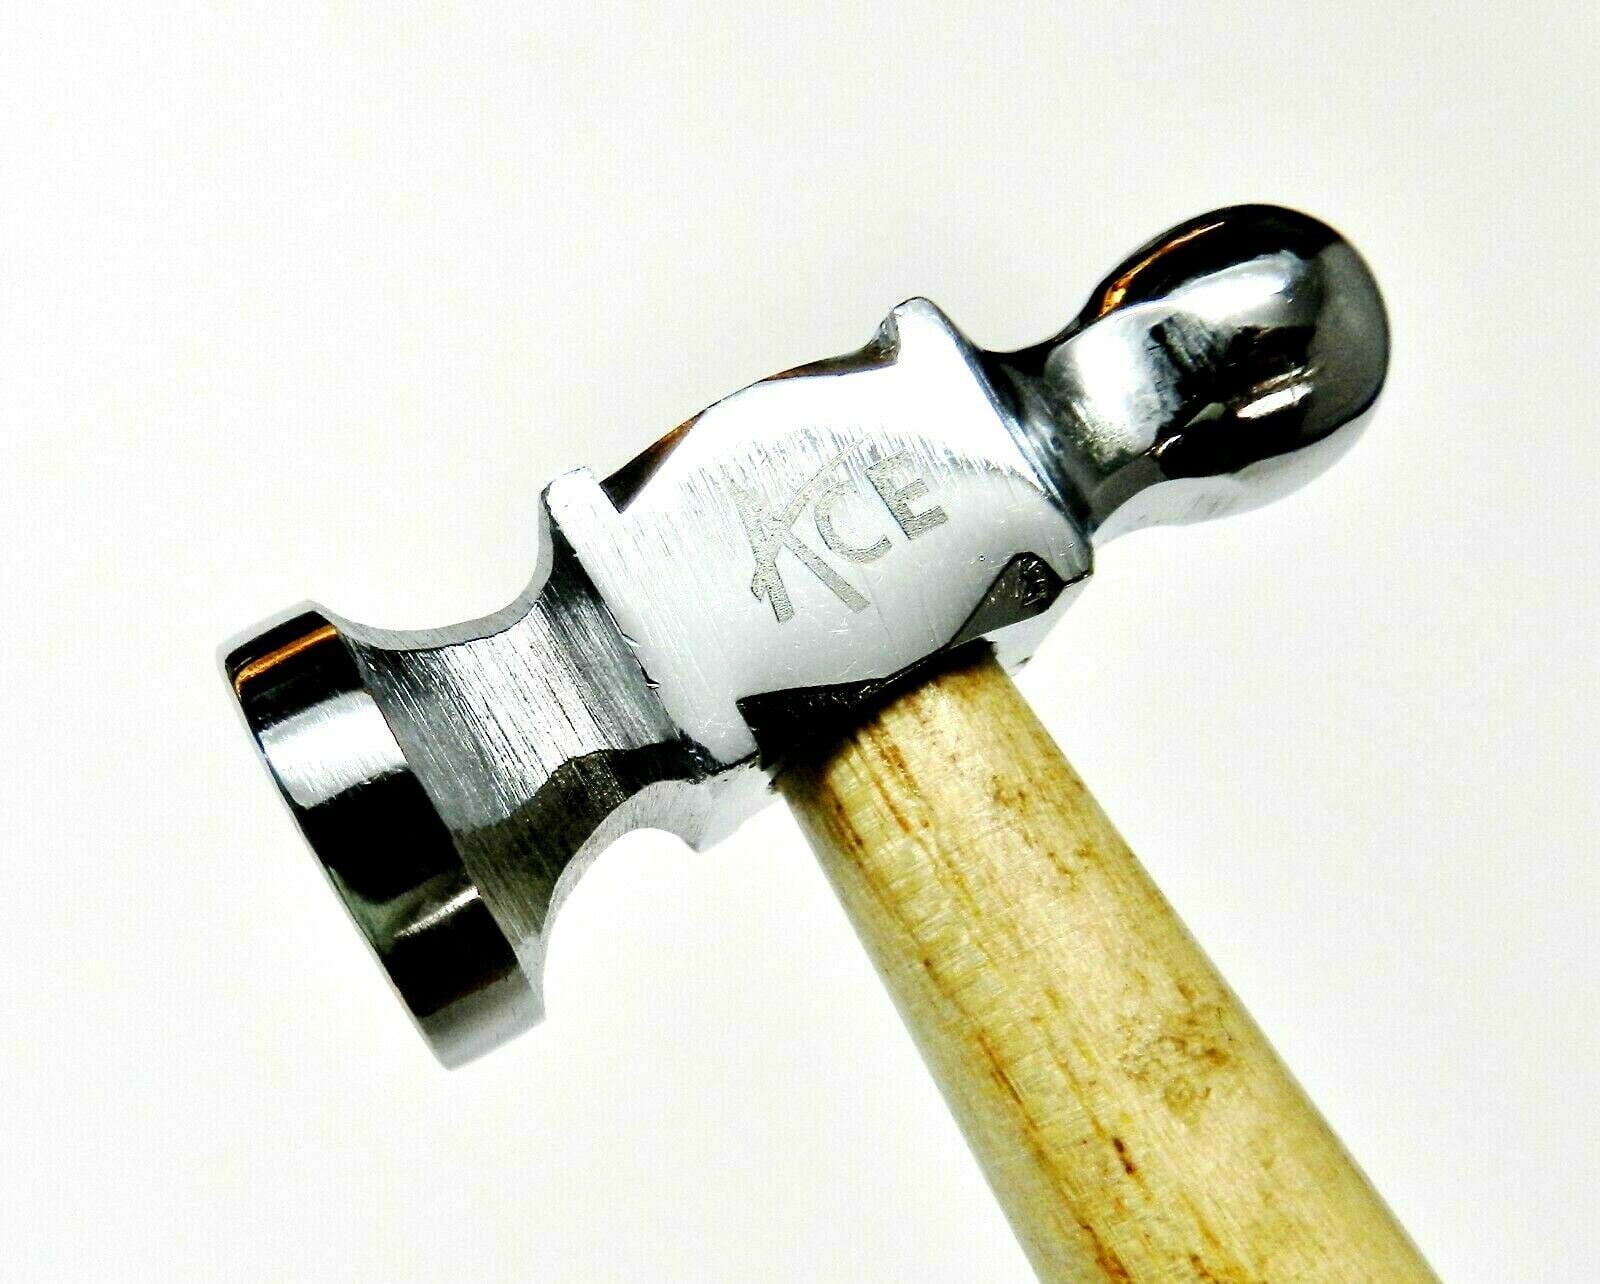 Jewelers Chasing Hammer 7/8 22mm Small Flat Face Jewelry Hammers Metalwork  A1 